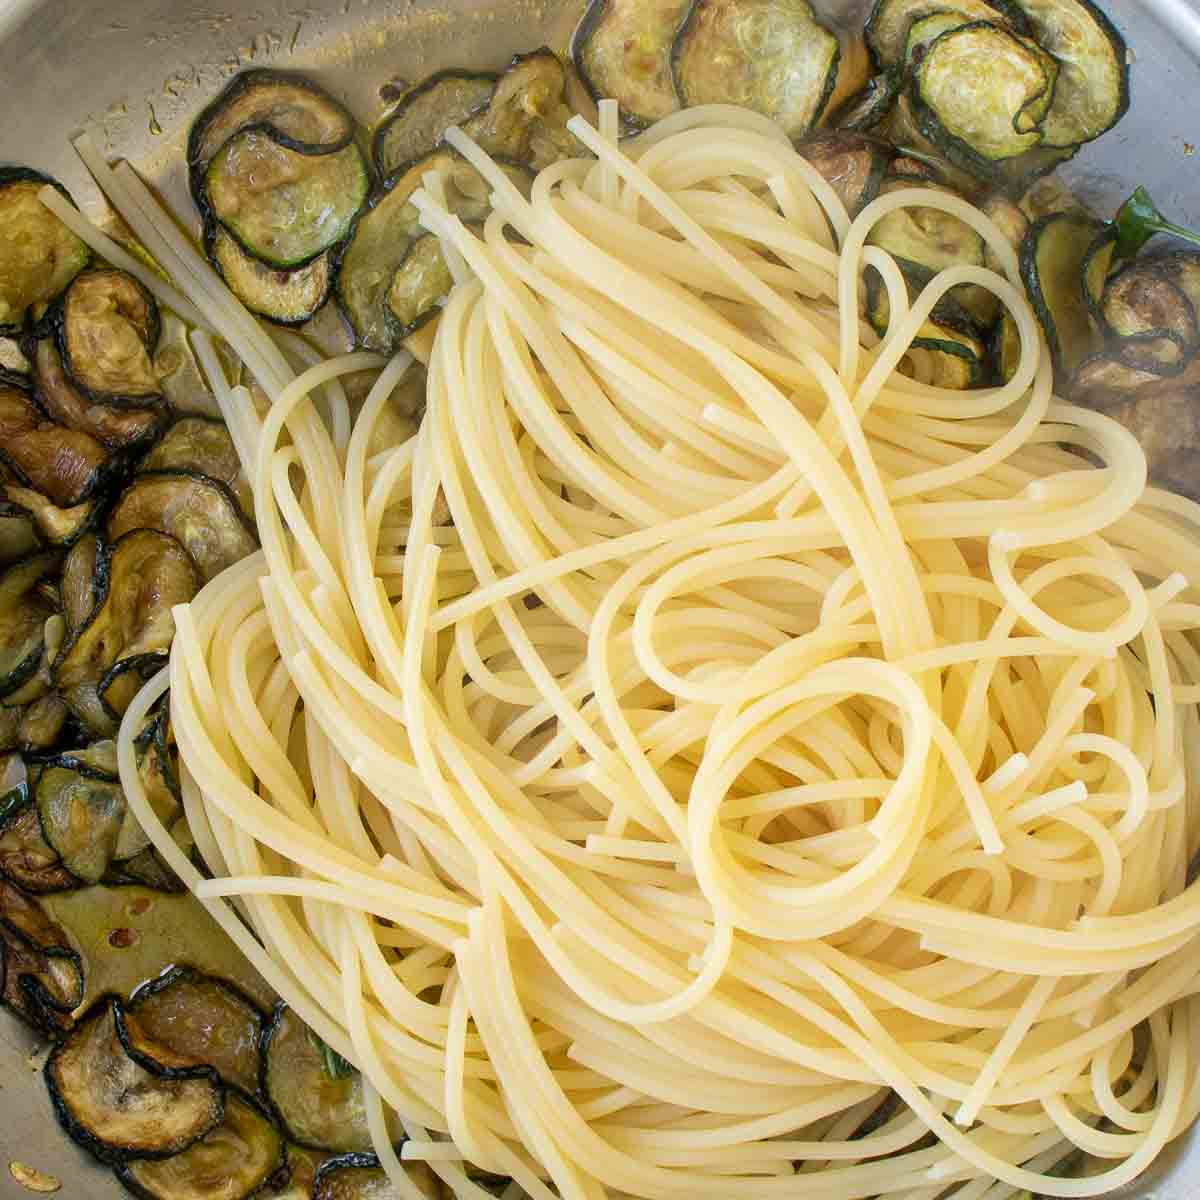 Cooked spaghetti on top of a panful of fried zucchini.